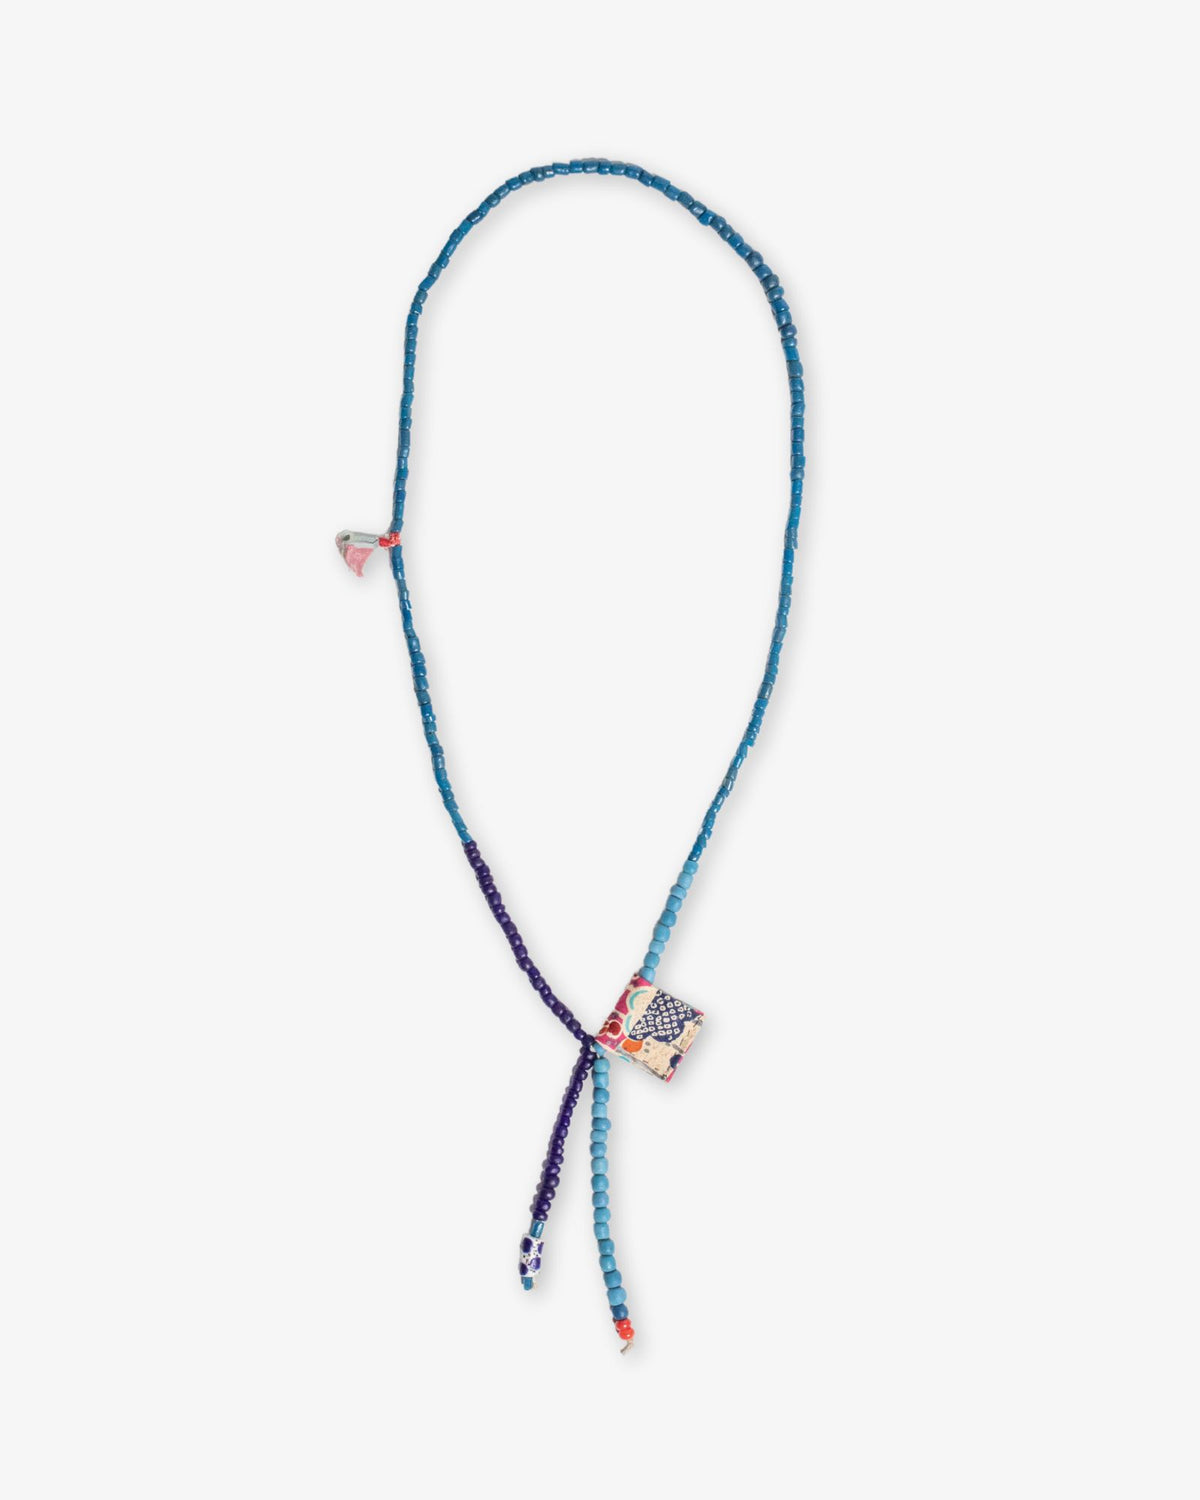 Handmade Beaded Necklaces by Tatter